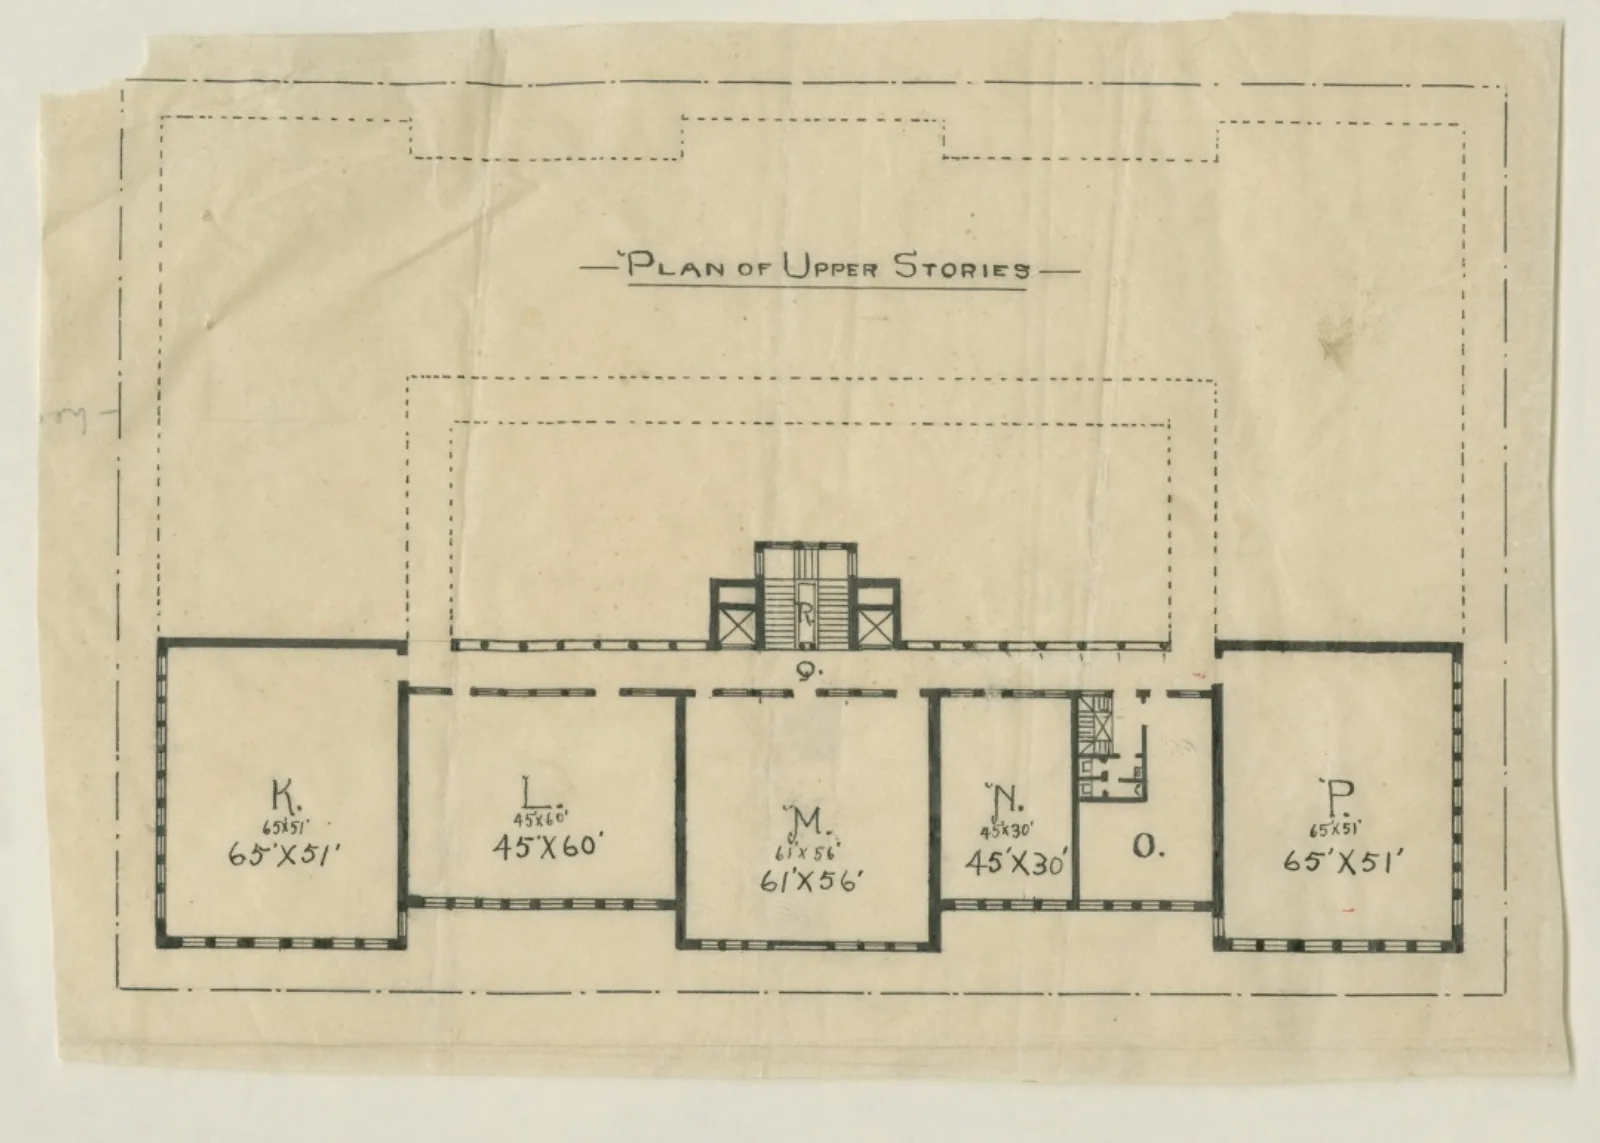 A blueprint shows the outline of the Newberry building with additional outlines showing what a future addition to the building might look like.